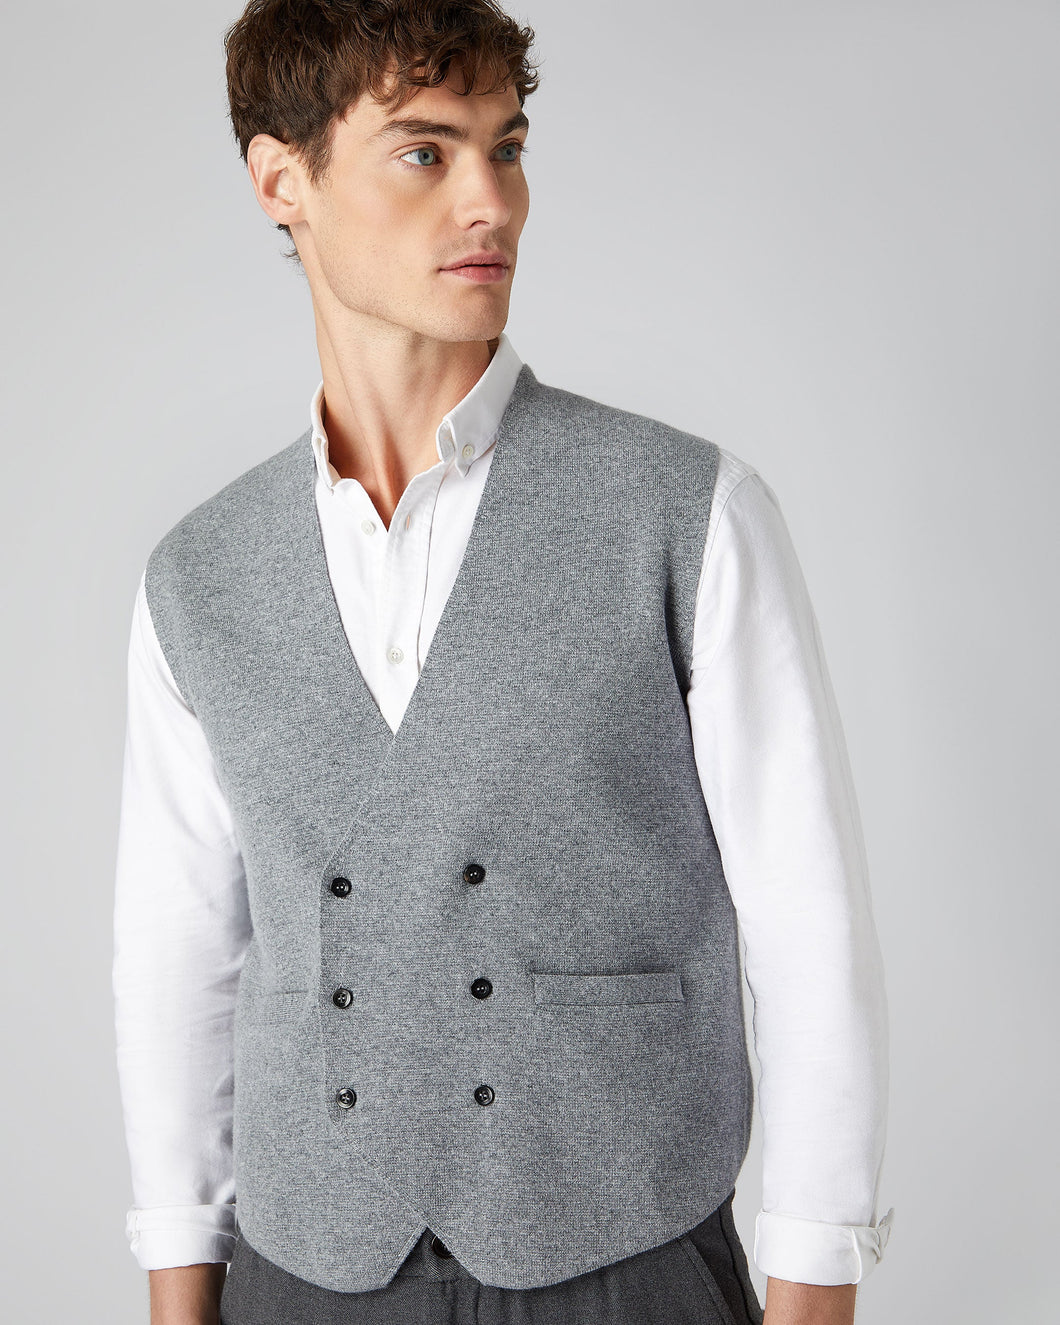 N.Peal Men's Double Breasted Cashmere Waistcoat Flannel Grey